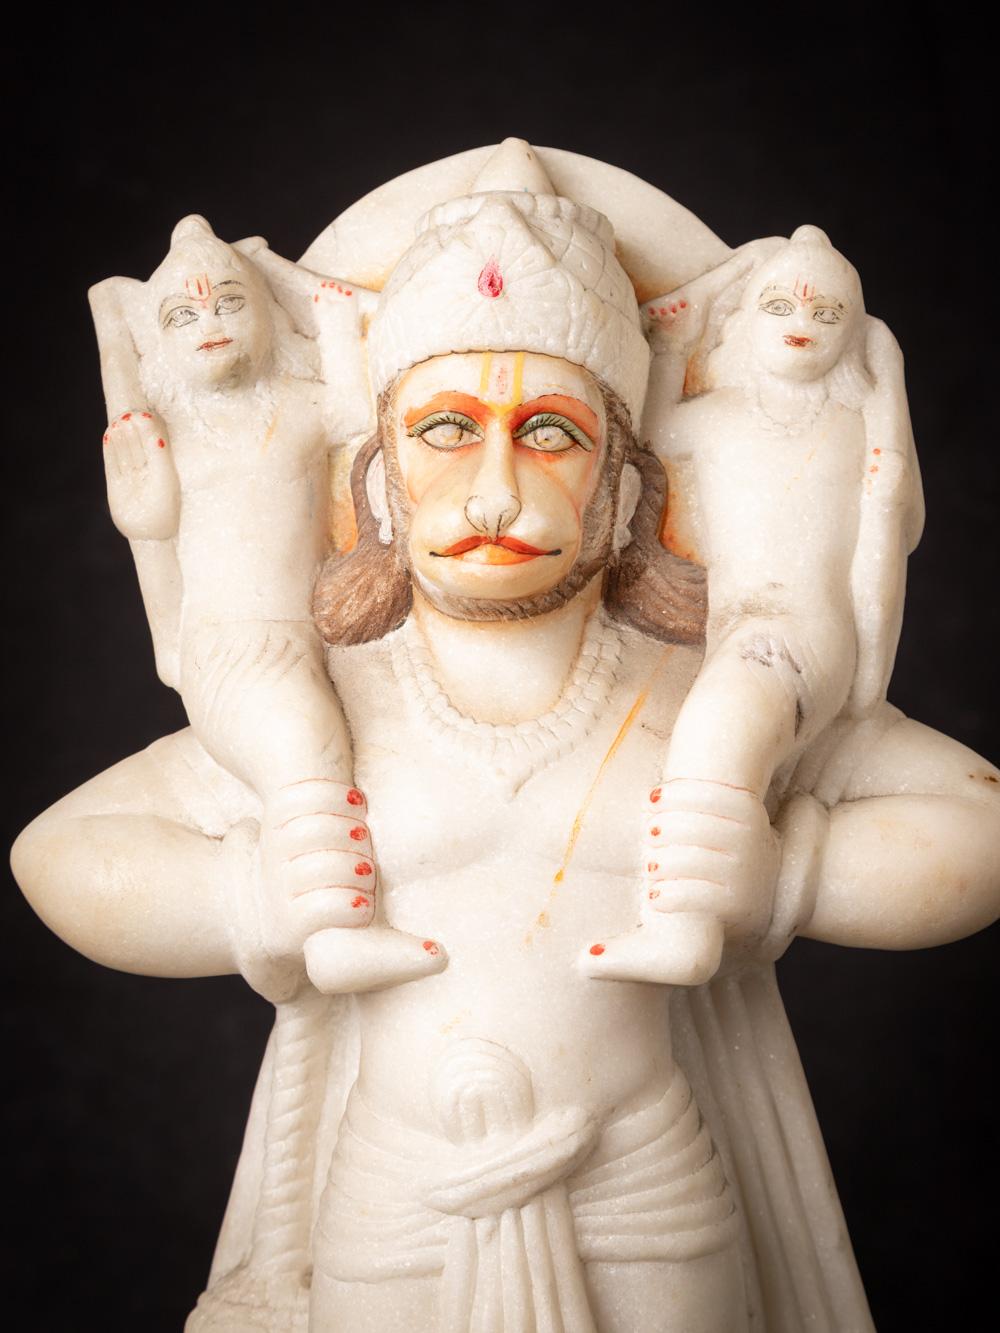 Middle 20th century old marble Hanuman statue from India - Original Buddhas For Sale 2